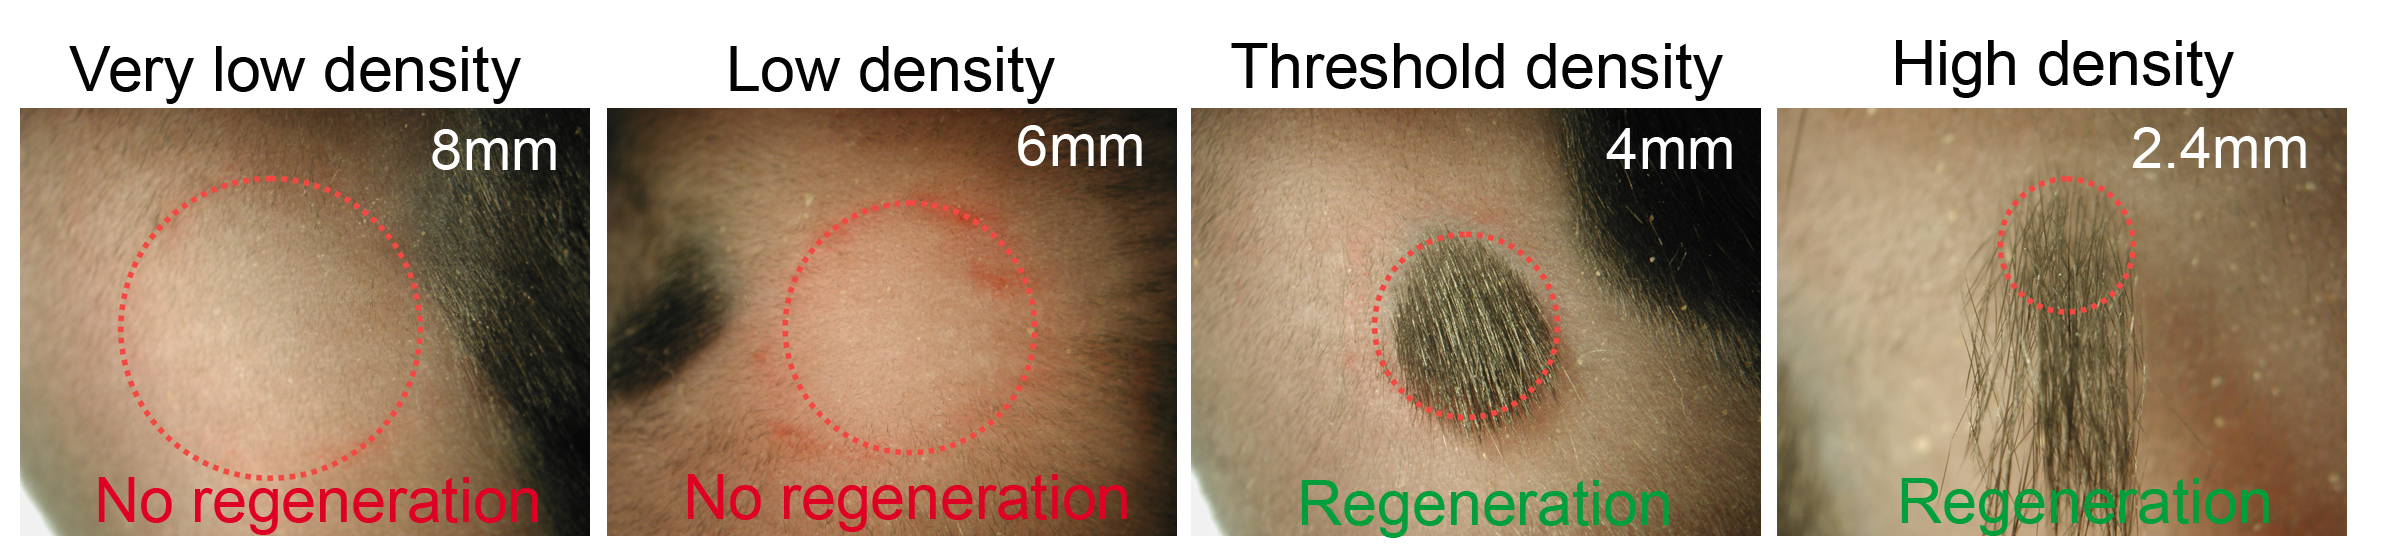 Regeneration of hairs after plucking is a population-based behavior that depends on the density and distribution of the plucked follicles